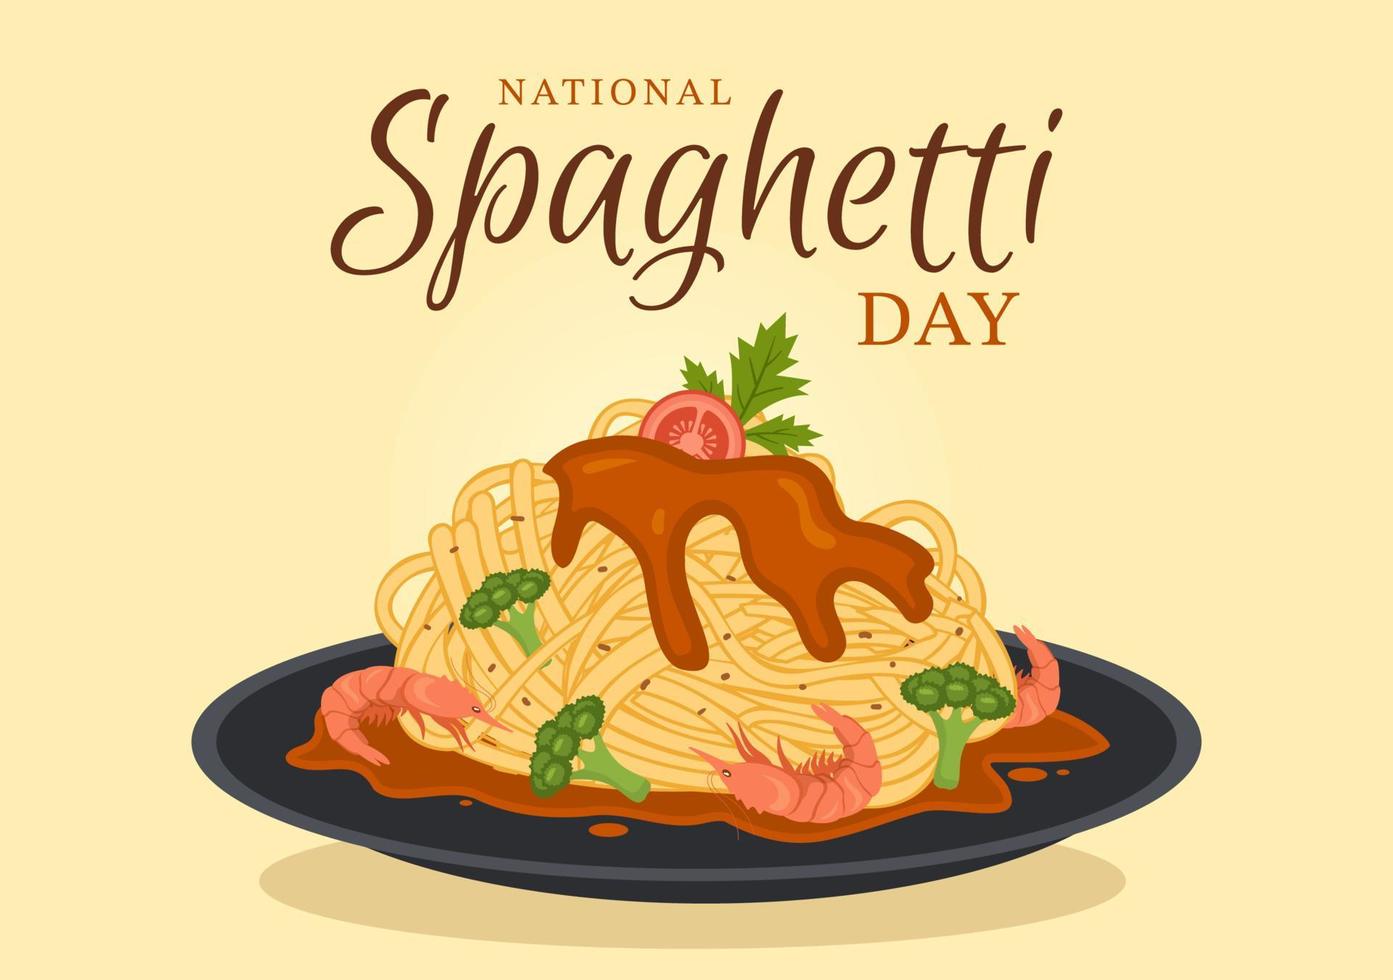 National Spaghetti Day on 4th January with a Plate of Italian Noodles or Pasta Different Dishes in Flat Cartoon Hand Drawn Template Illustration vector